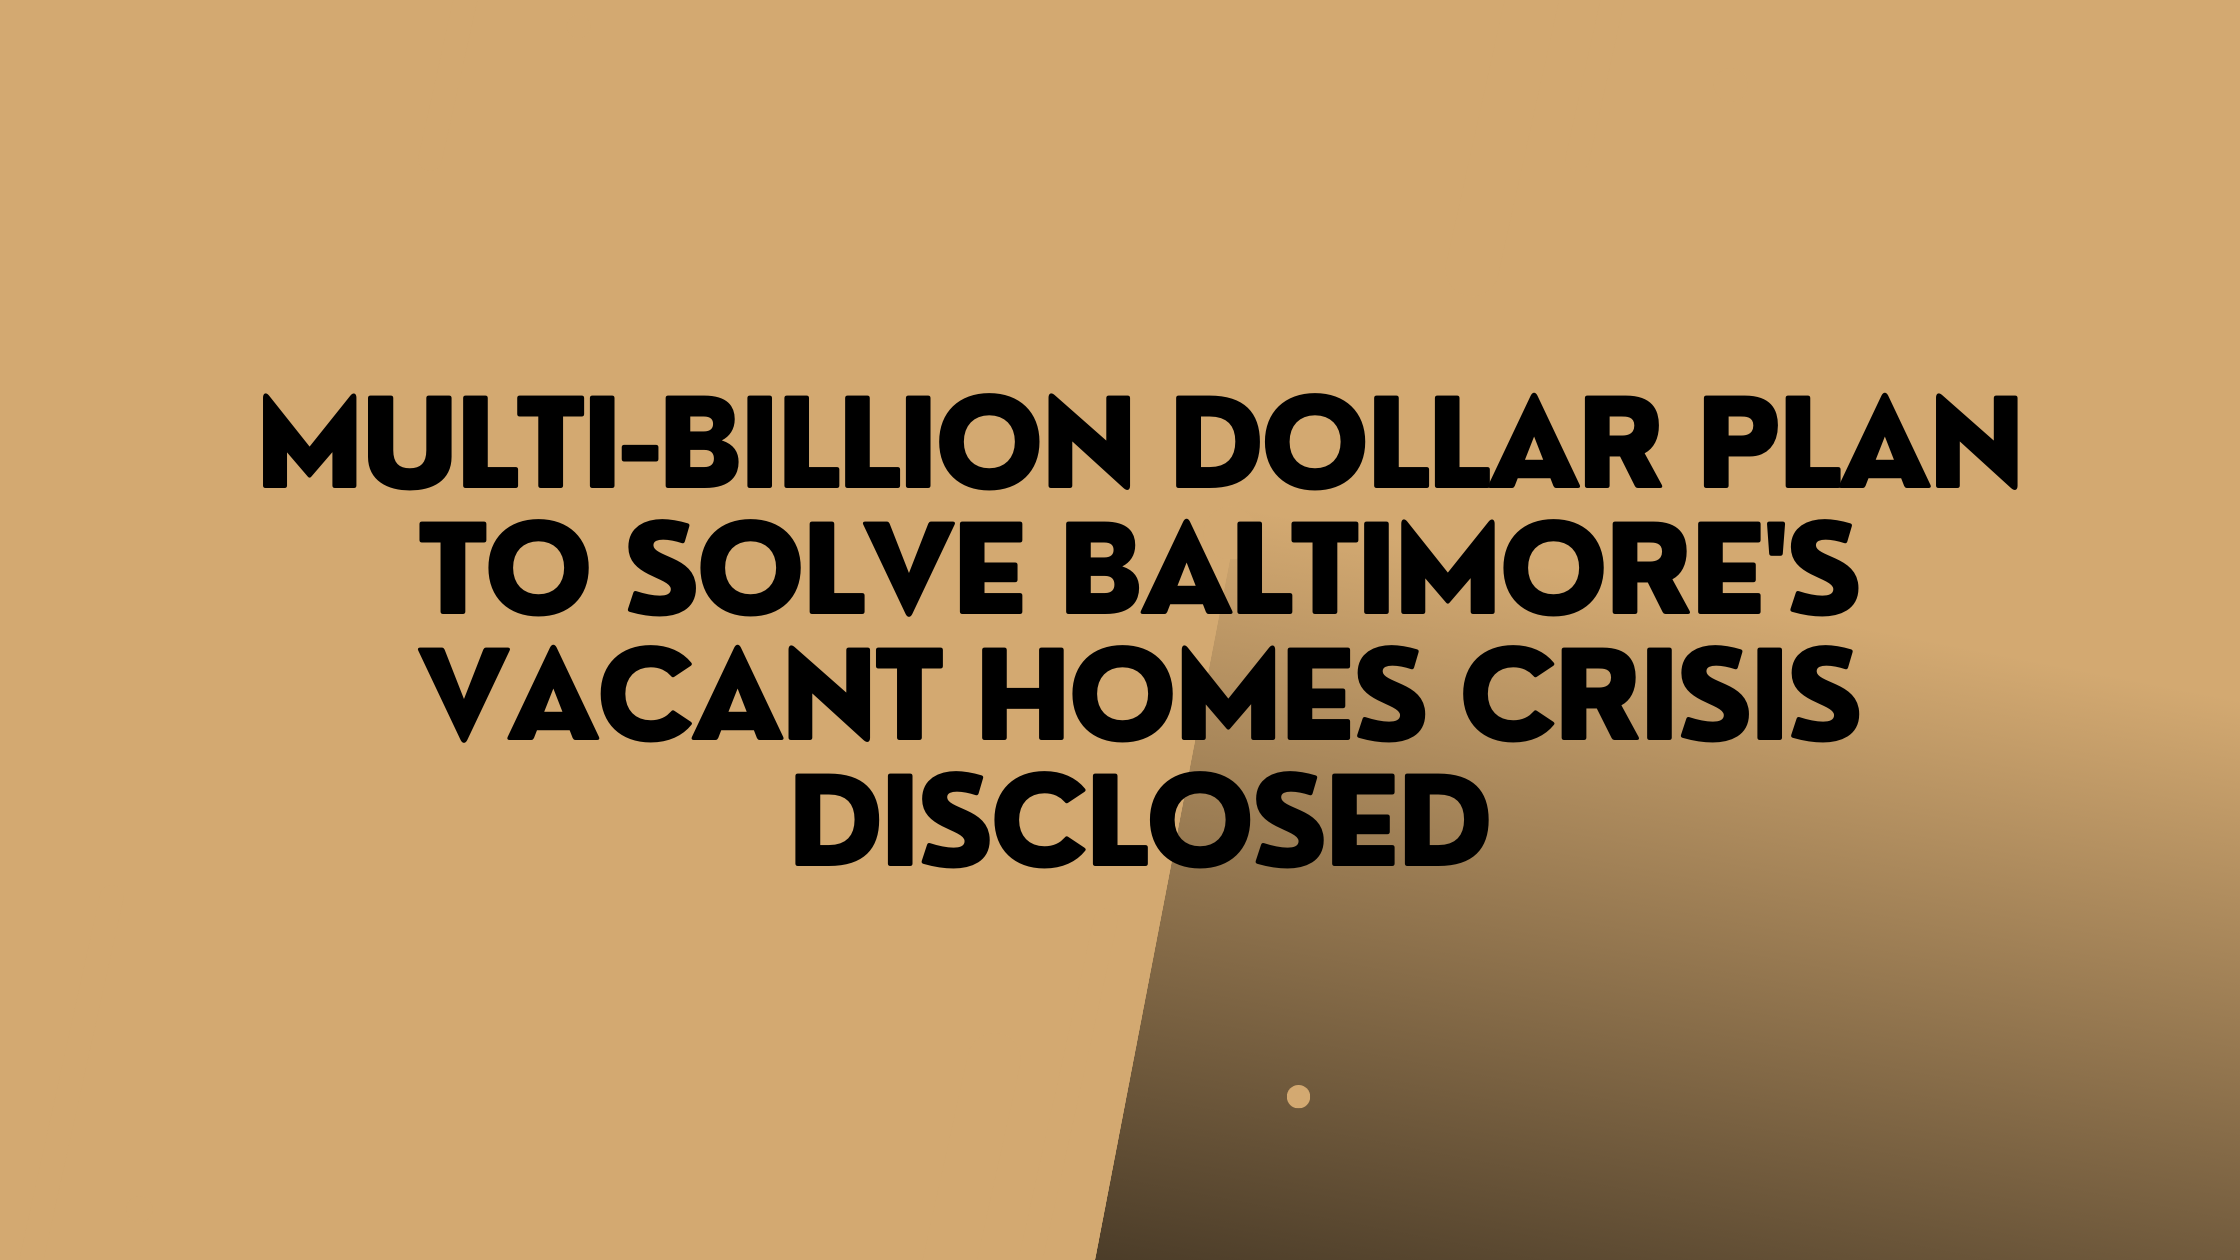 Multi-billion dollar plan to solve Baltimore's vacant homes crisis disclosed